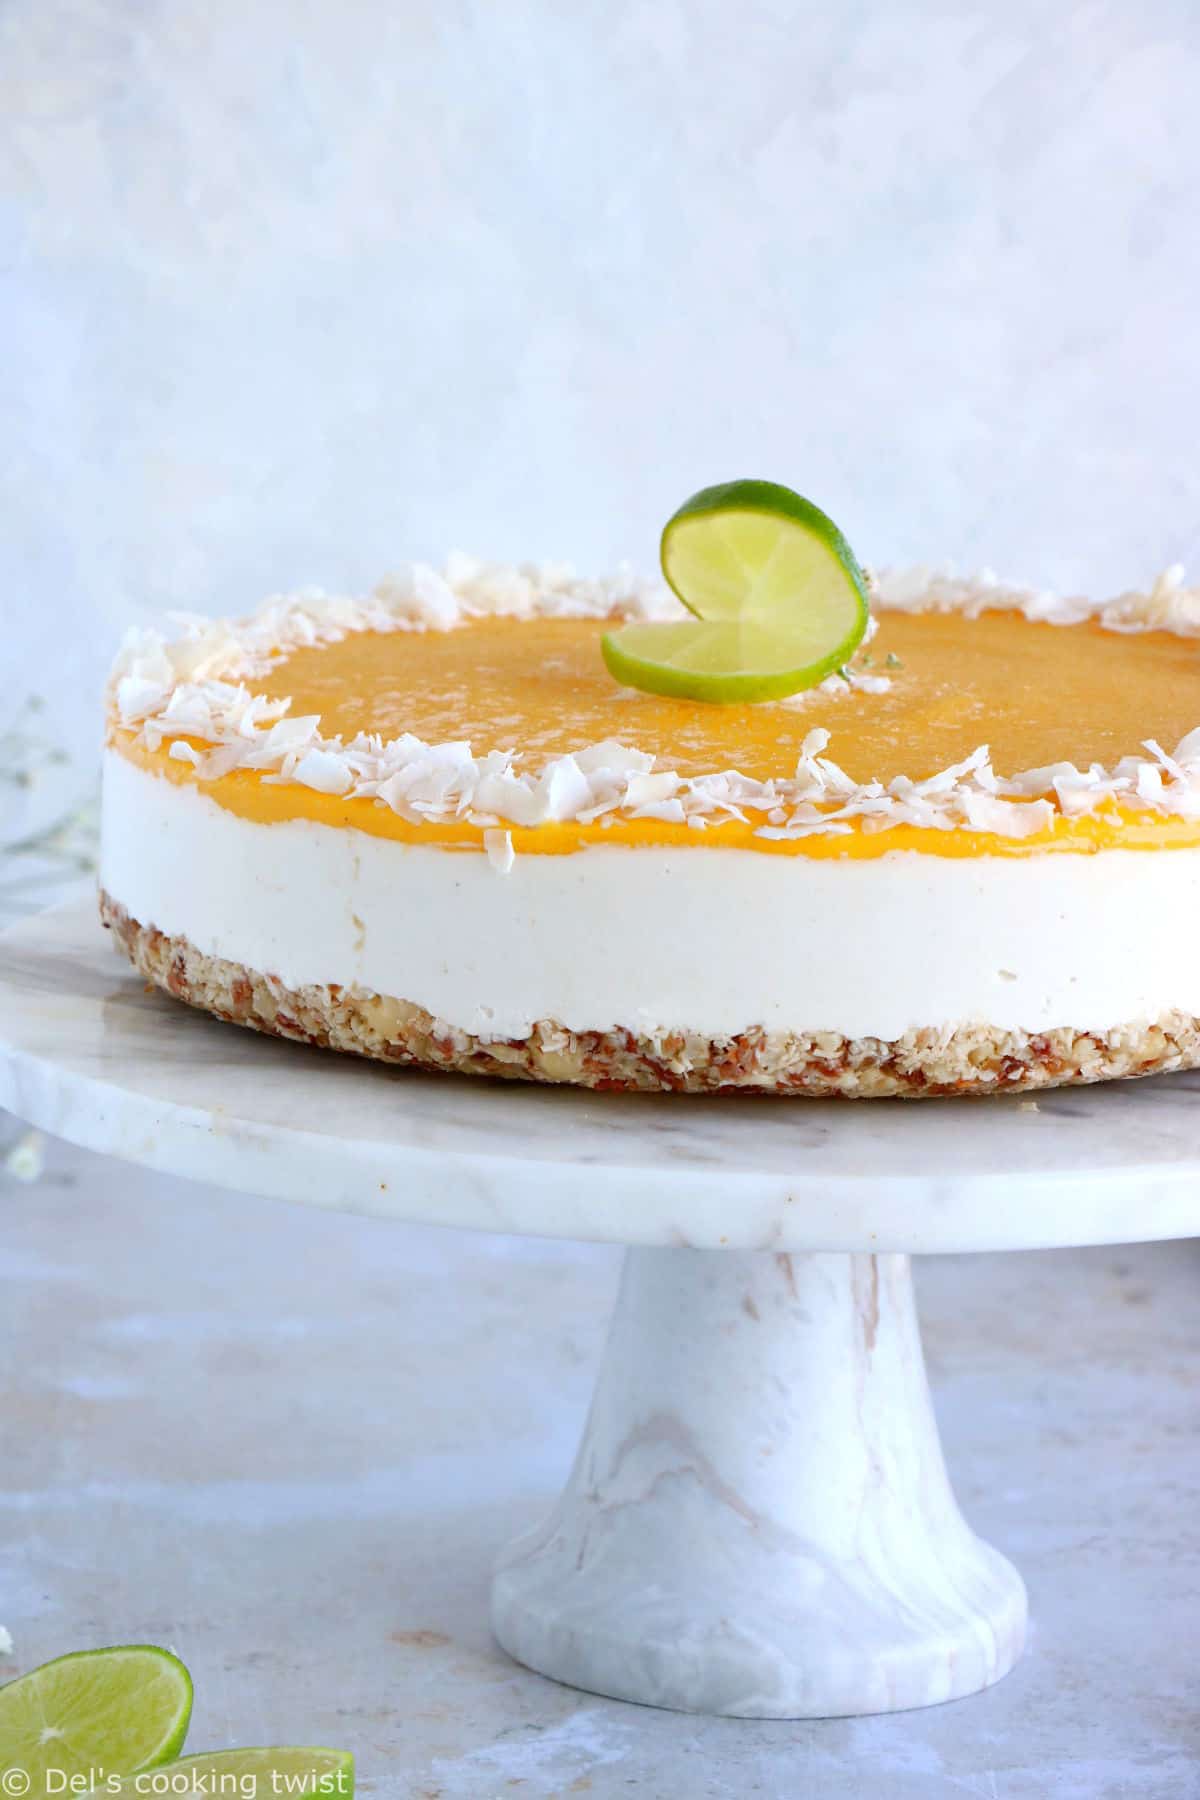 This raw coconut mango cheesecake is a very refreshing fruity dessert. Also vegan, gluten-free and naturally sweetened, it's the ultimate healthy dessert to indulge in!